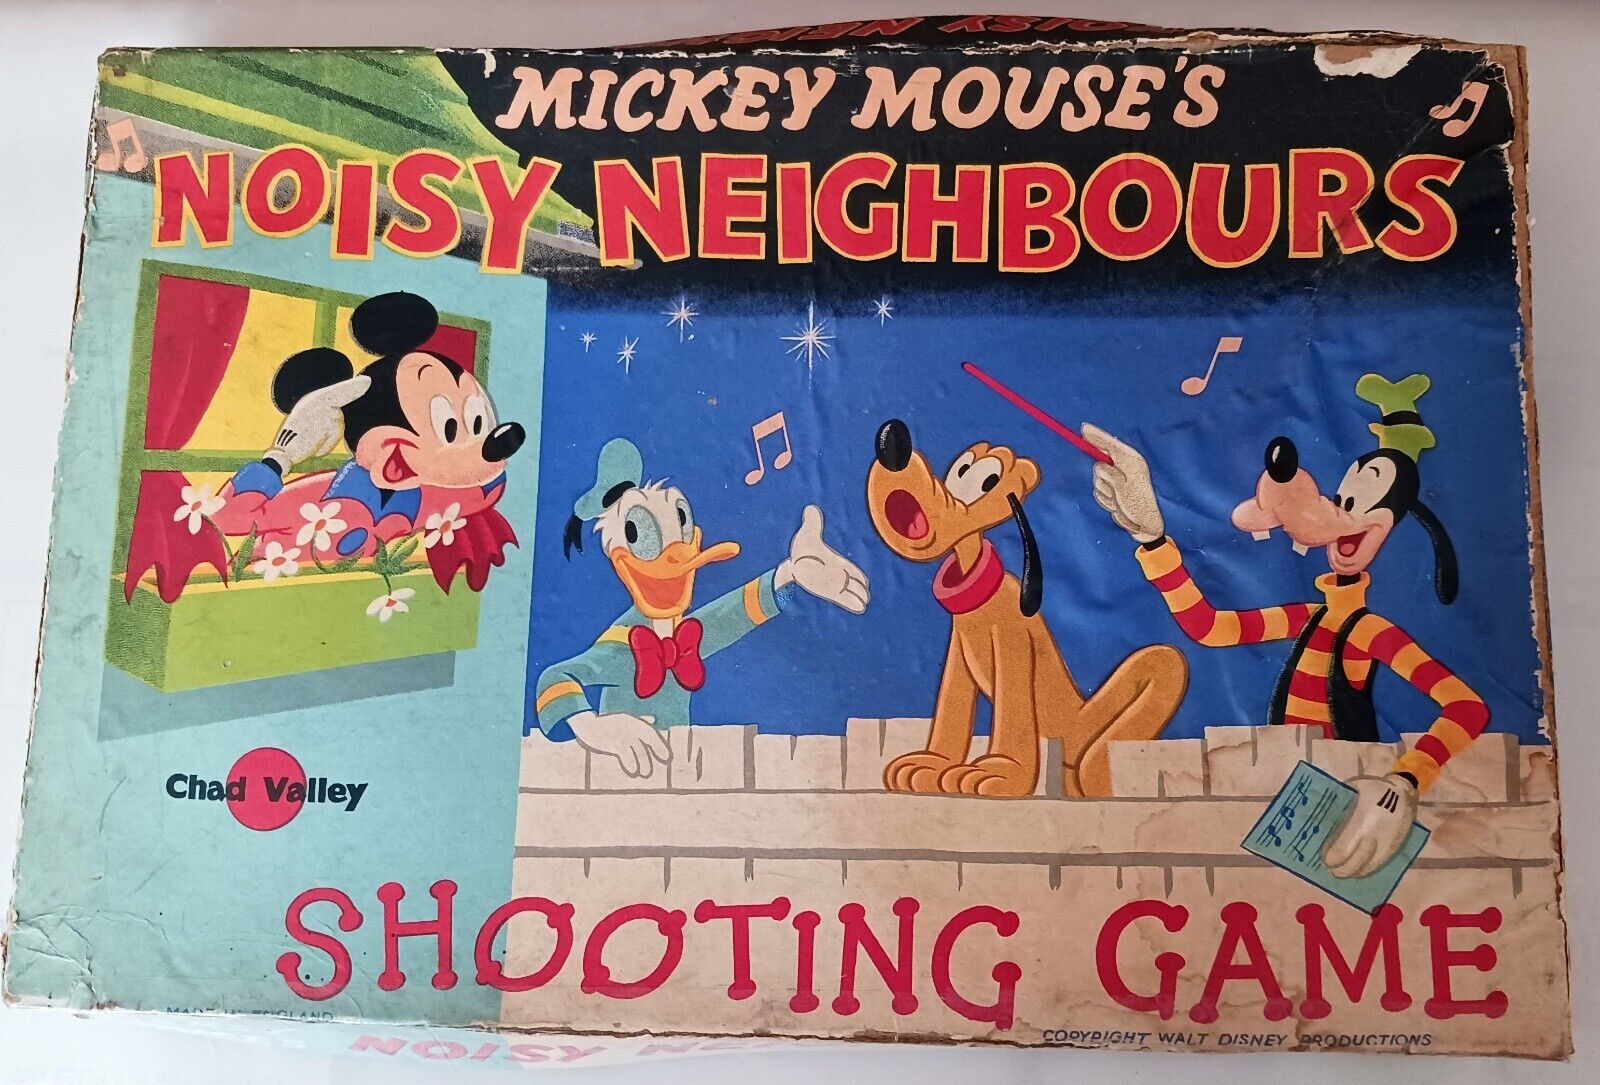 Rare Mickey Mouse Noisy Neighbours Shooting Game made in England by Chad Valley